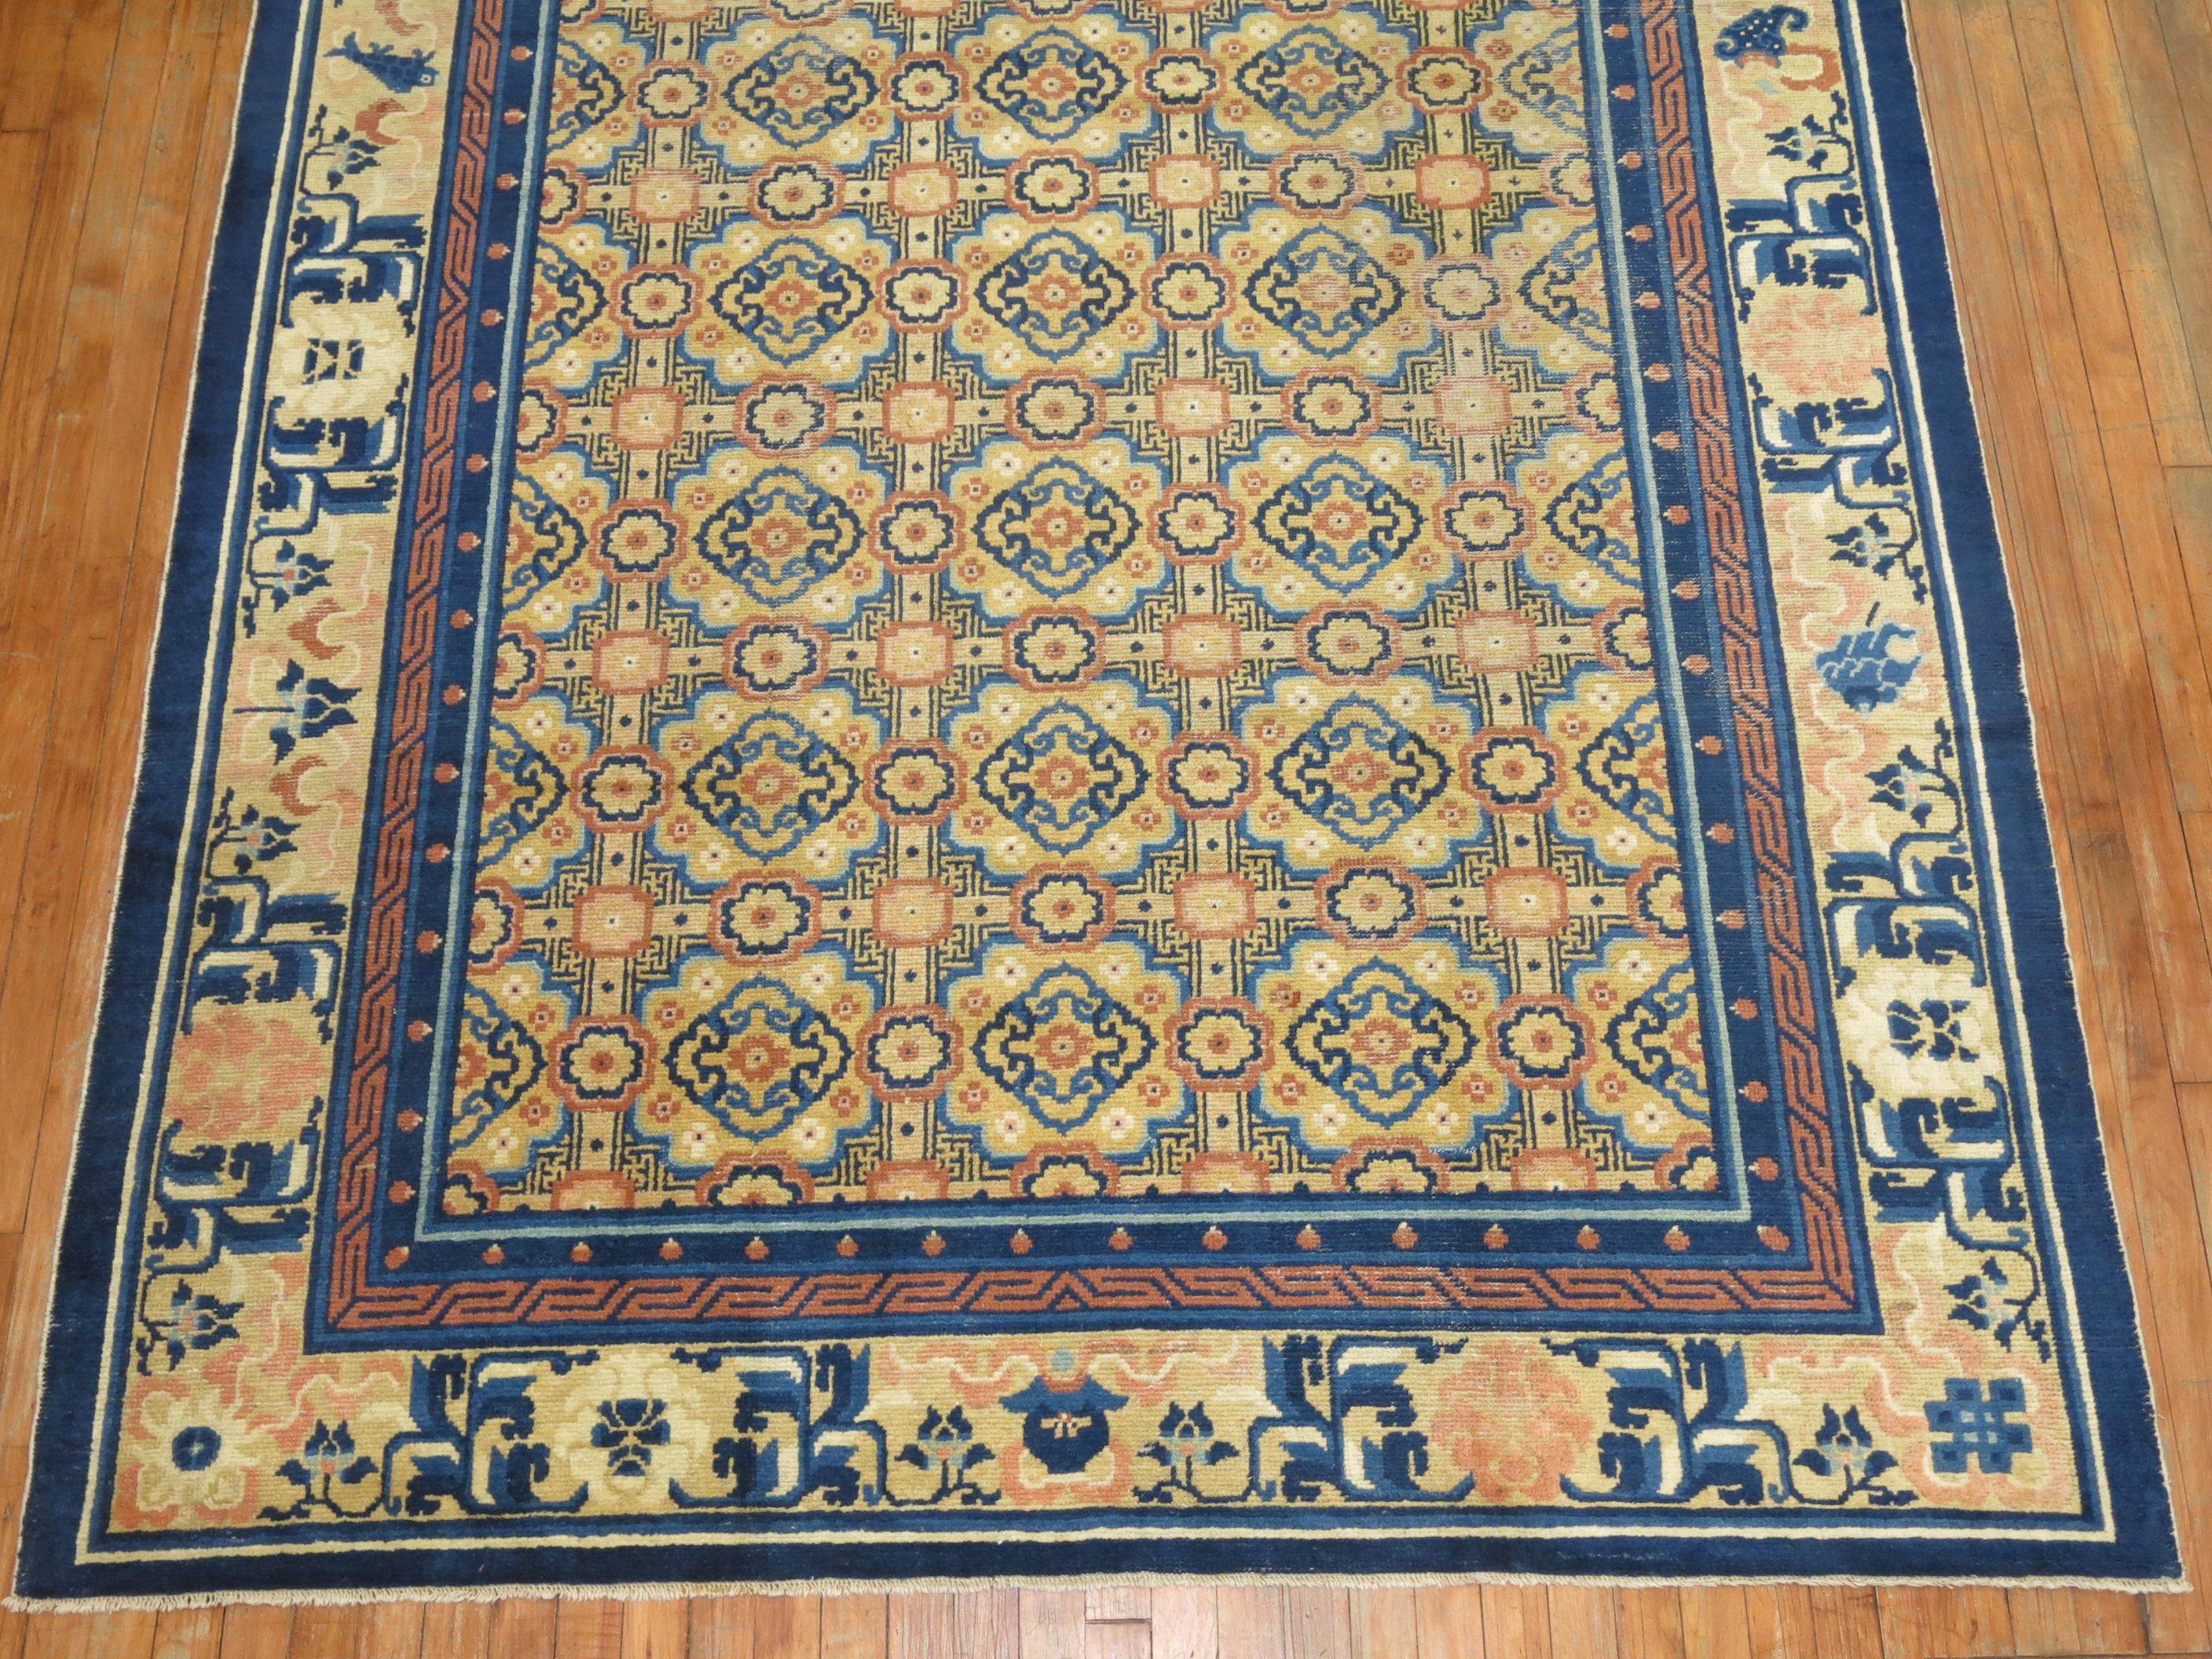 A charming early 20th century Chinese rug with an all over geometric motif in peach, beige, various shades of blue

Measures: 6'4'' x 811''.